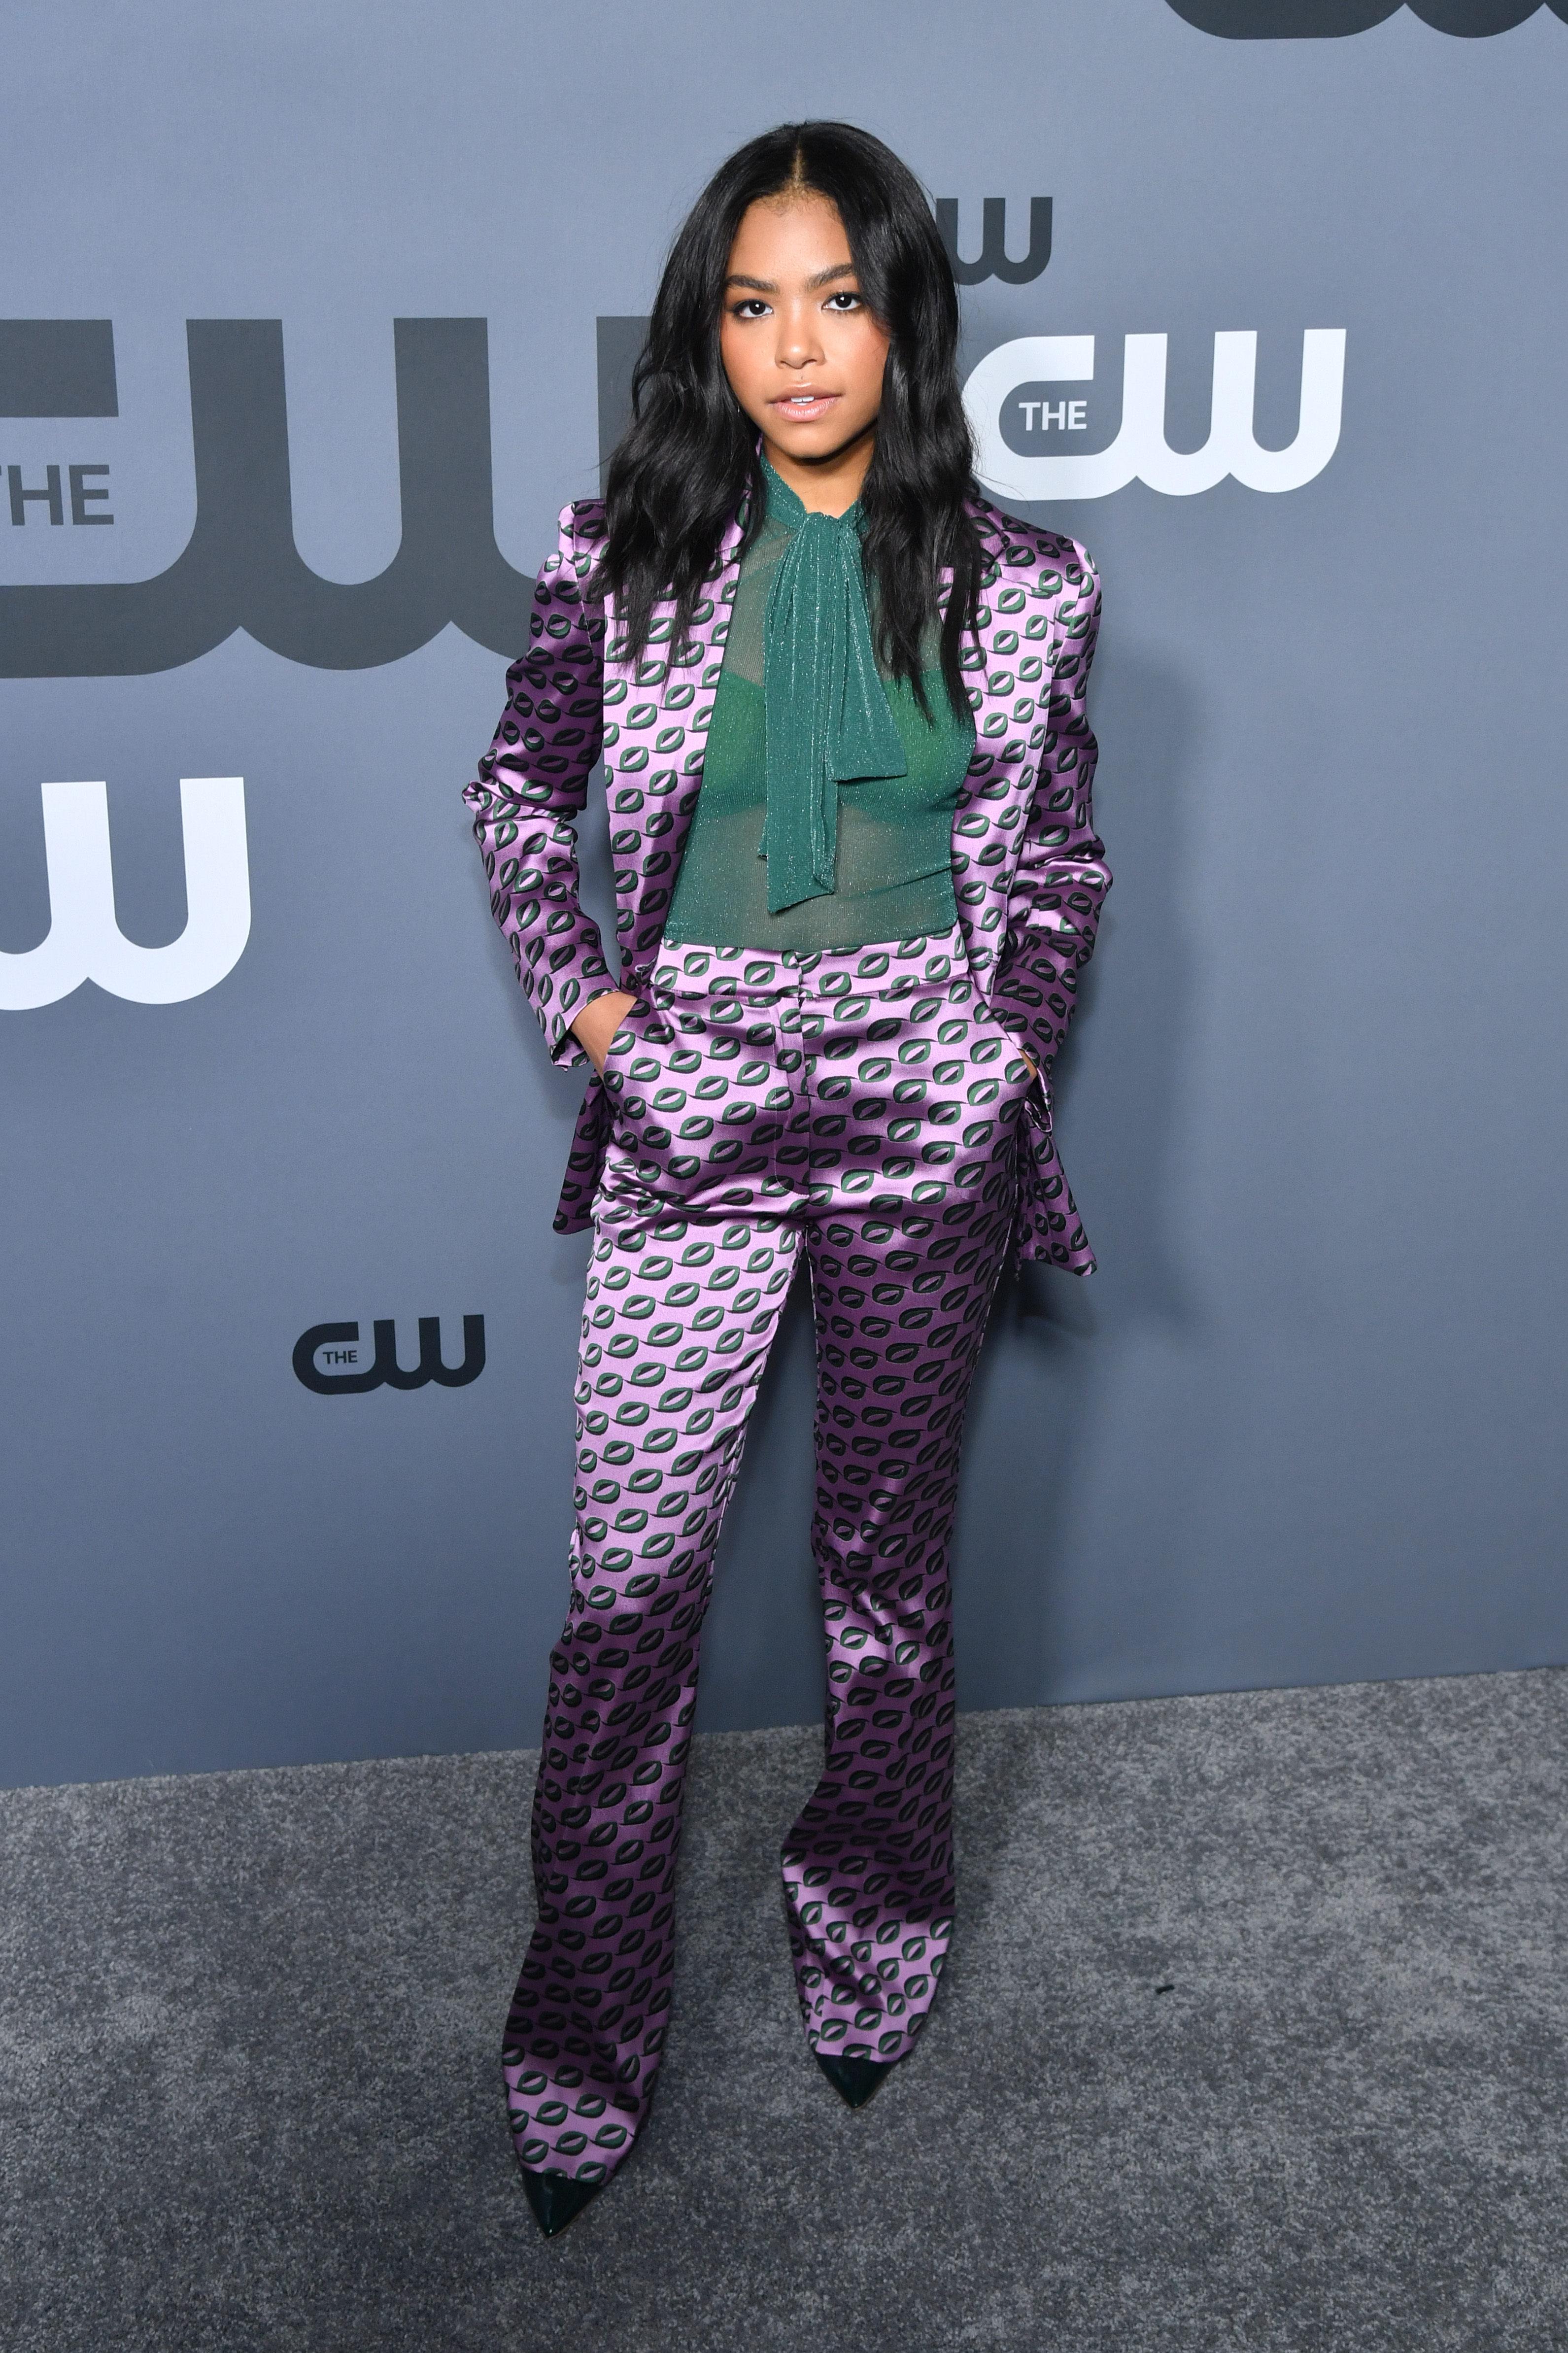 Raven's Home's Navia Robinson's Red Carpet Looks: Pictures | J-14